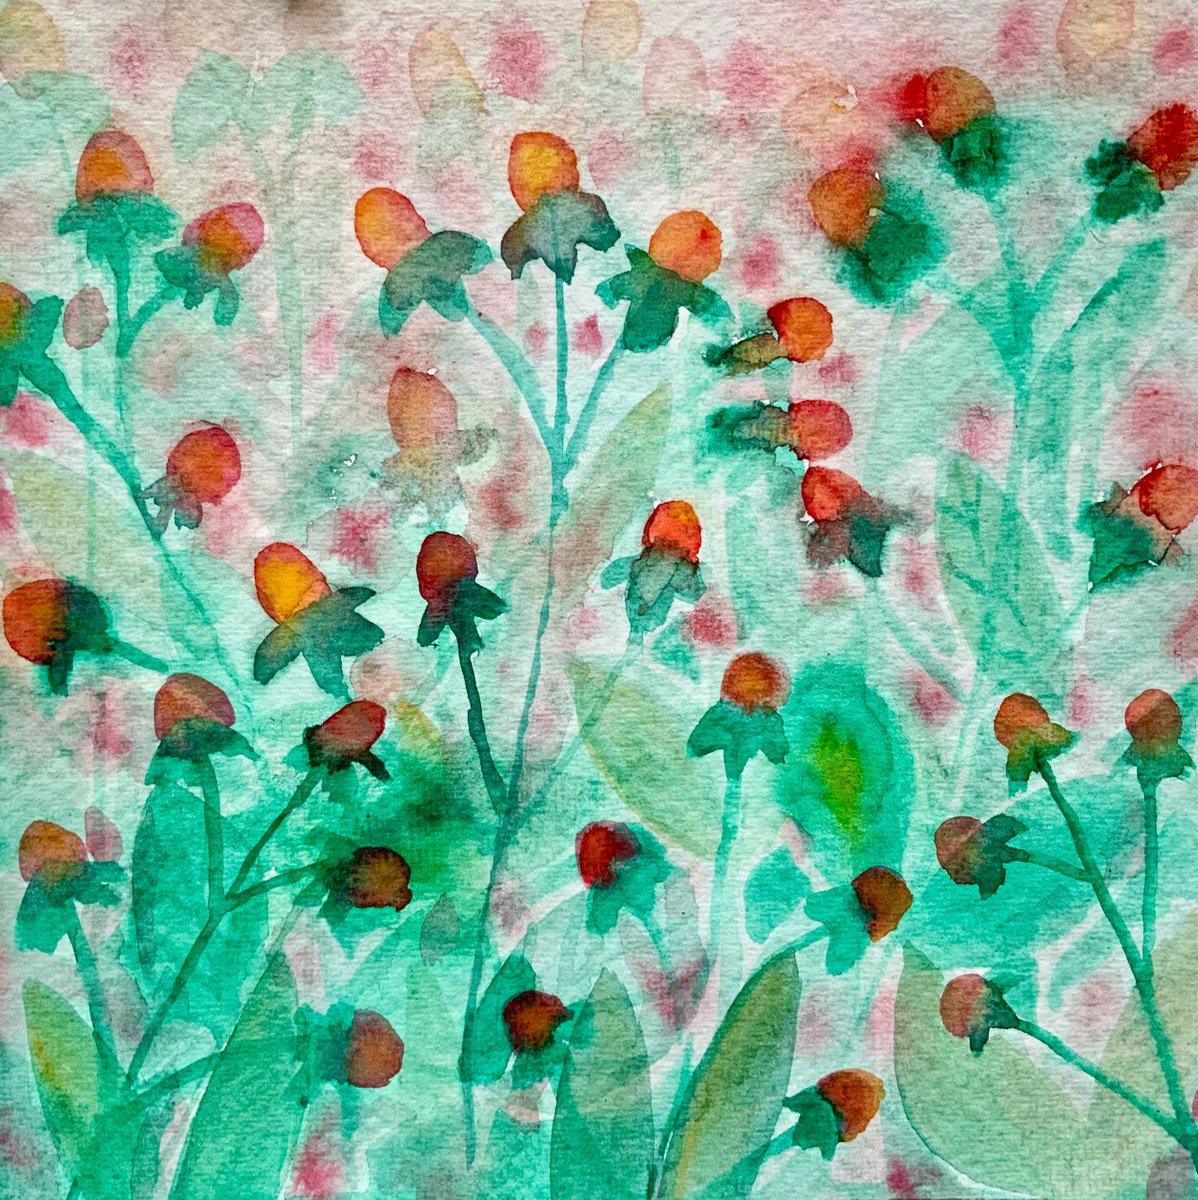 Berries and Leaves, watercolour painting by Janice MacDougall